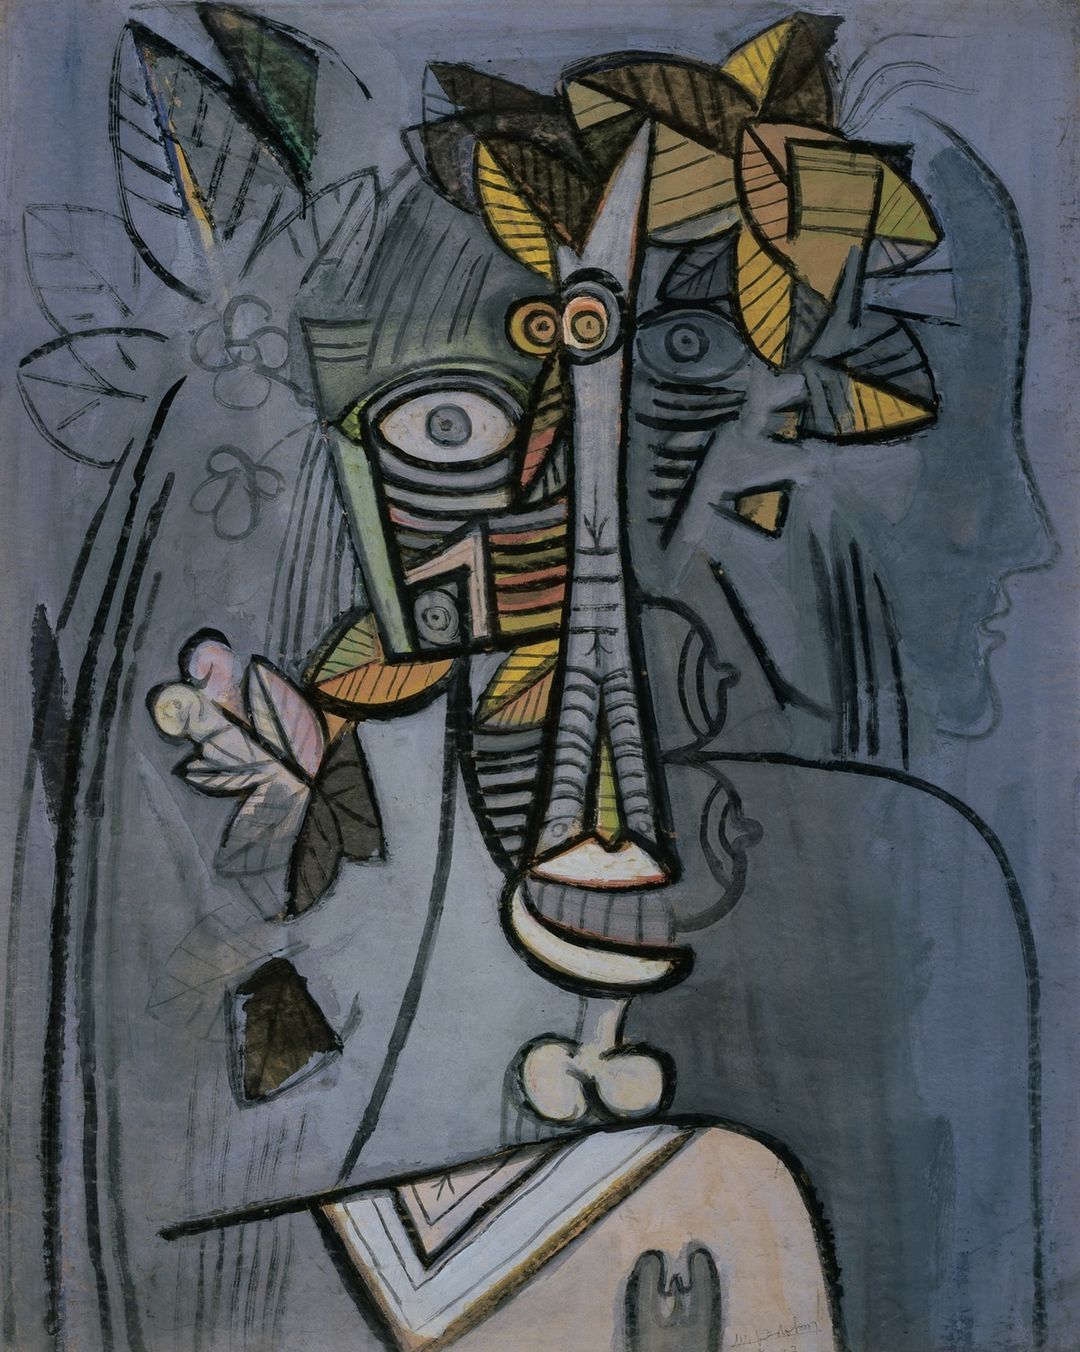 Your Own Life (Ta propre vie), 1942 by Wilfredo Lam